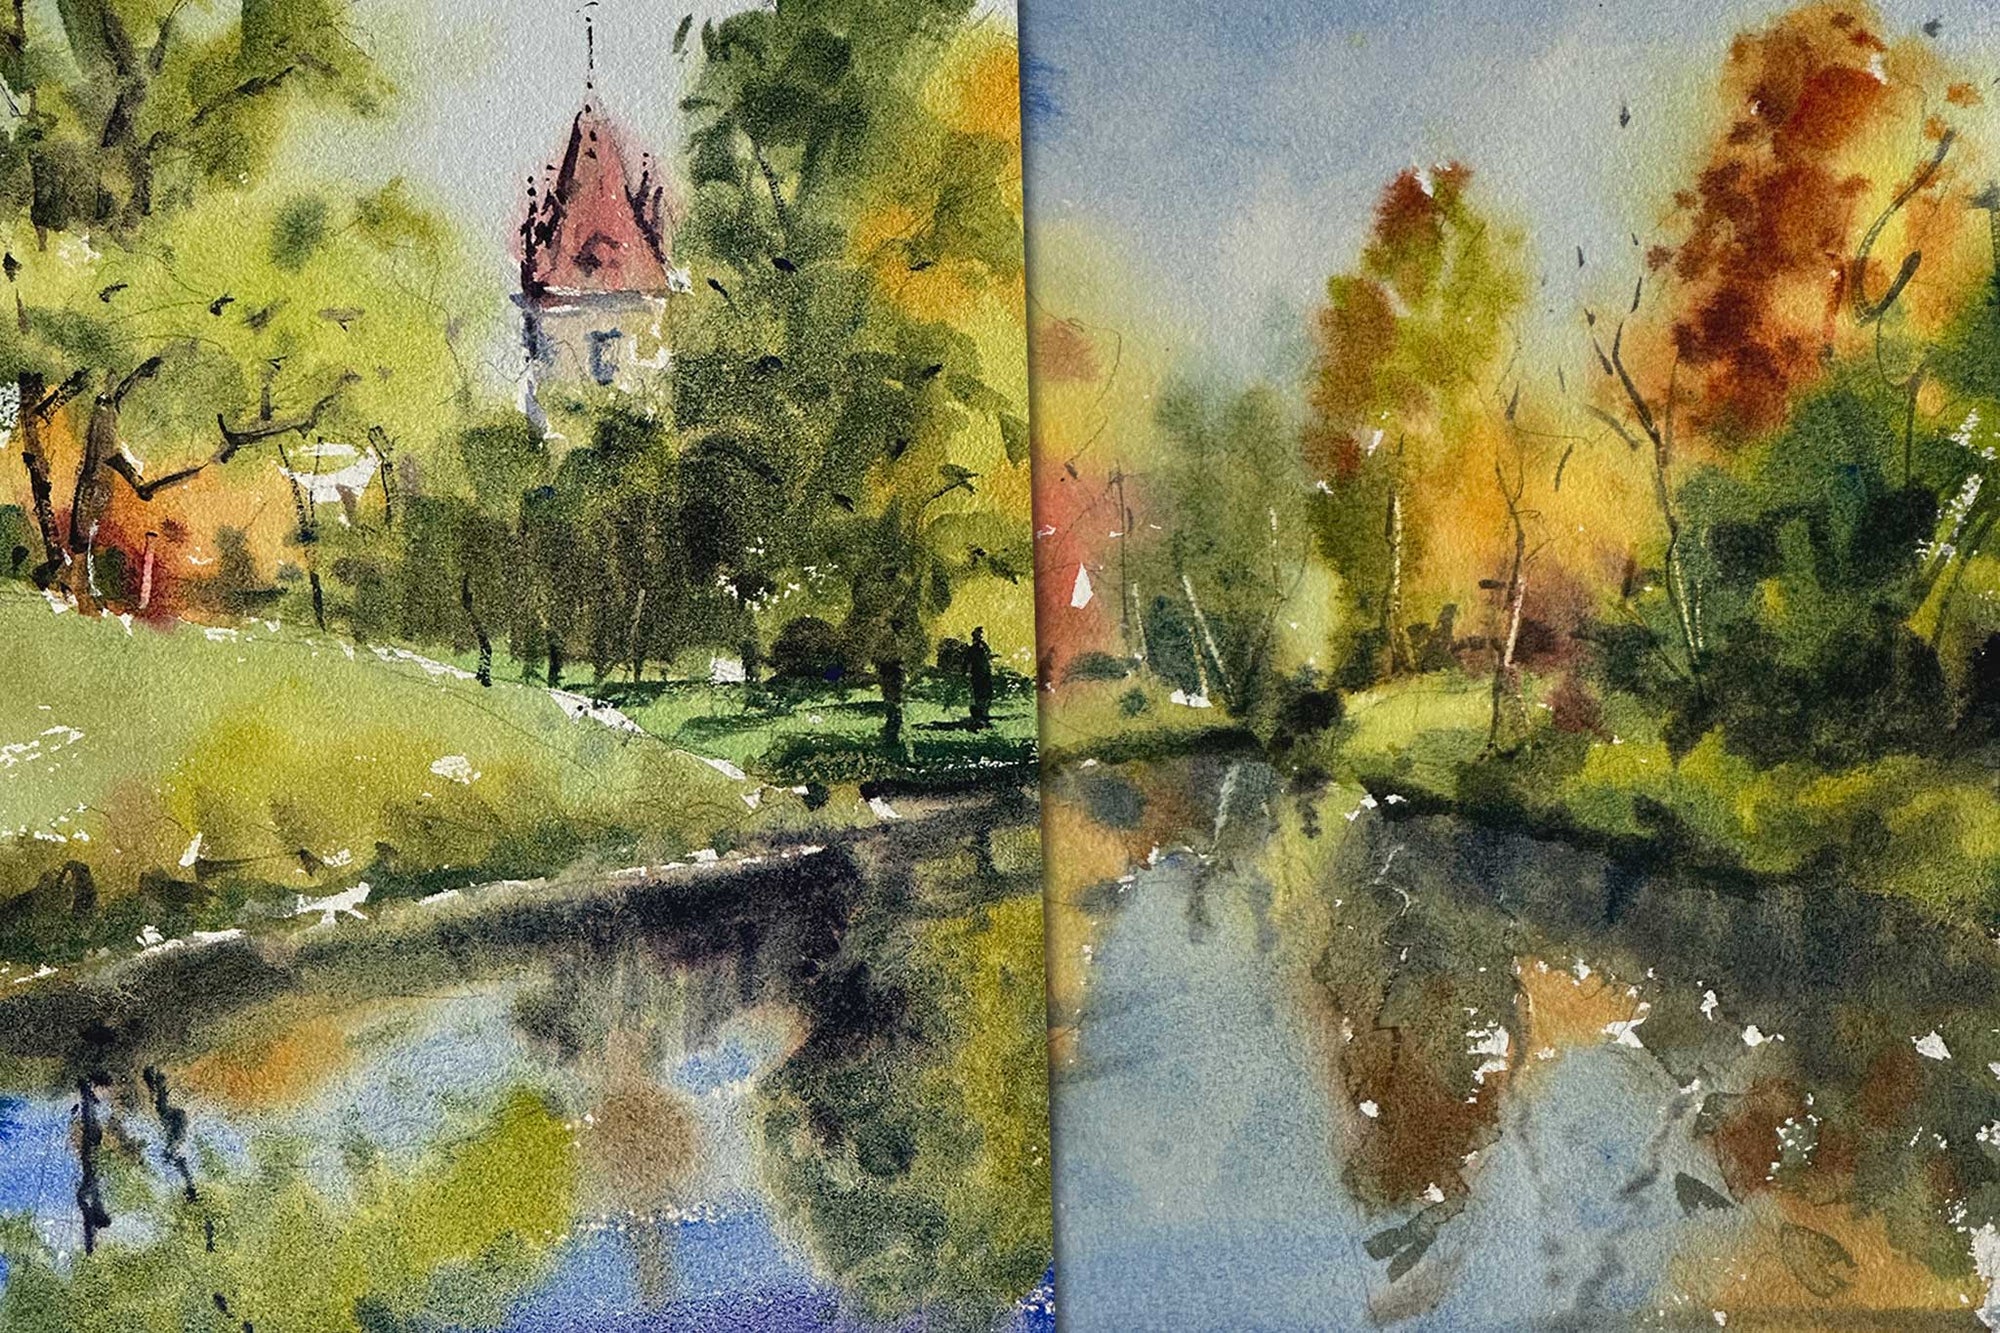 Wet on Wet - Two Landscapes